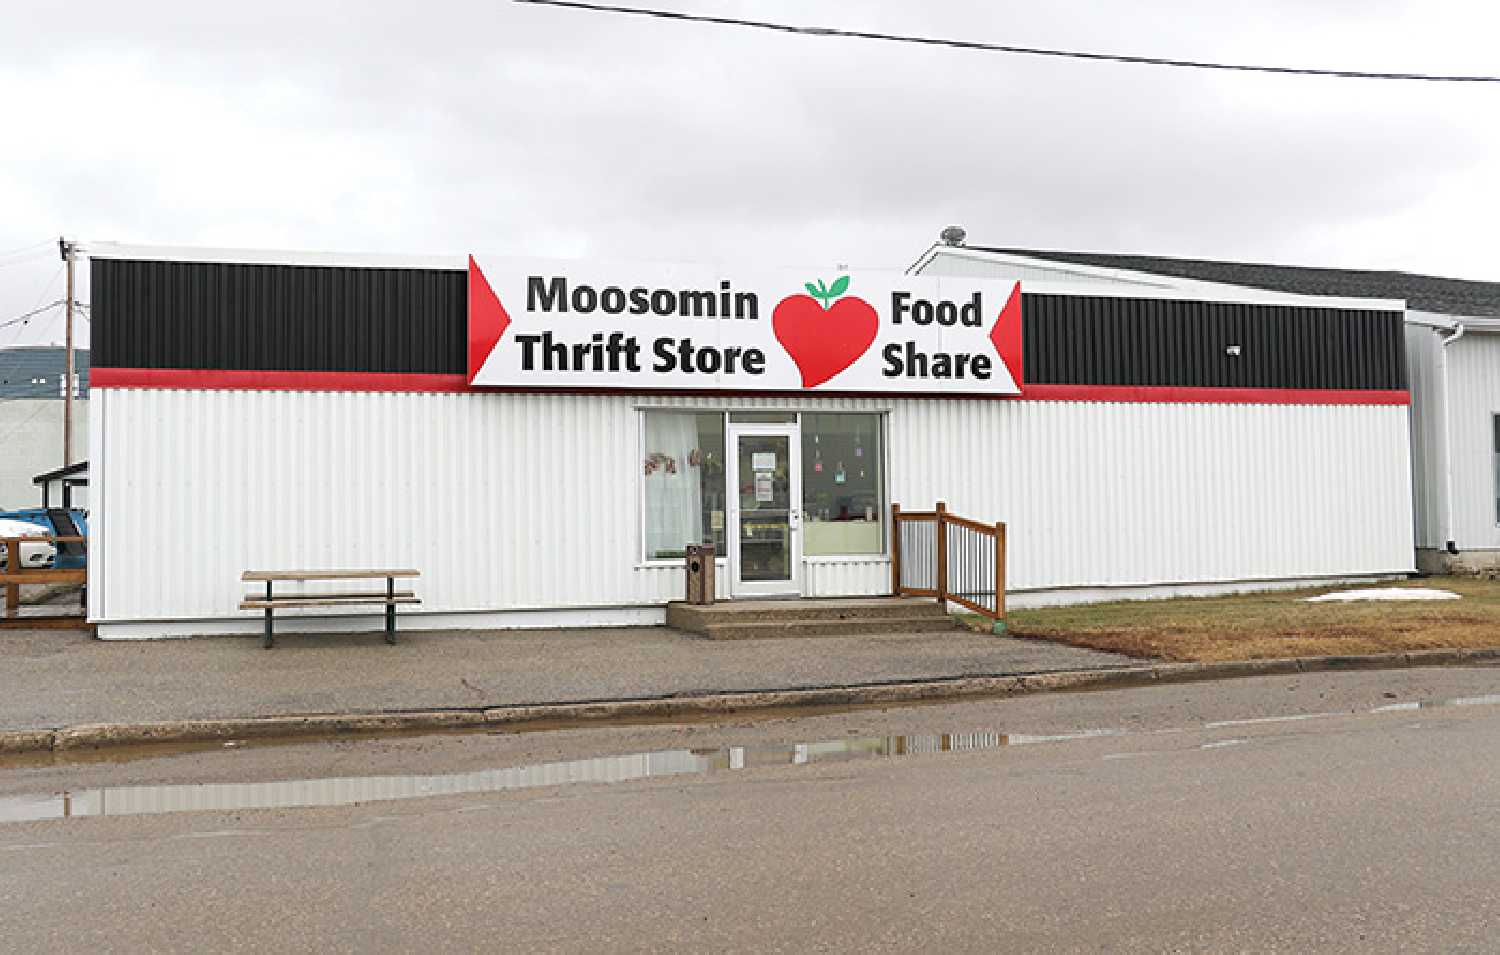 The Moosomin Thrift Store and Food Share is hosting a free barbecue for the community at noon, to celebrate their 5th anniversary of their new location in town.